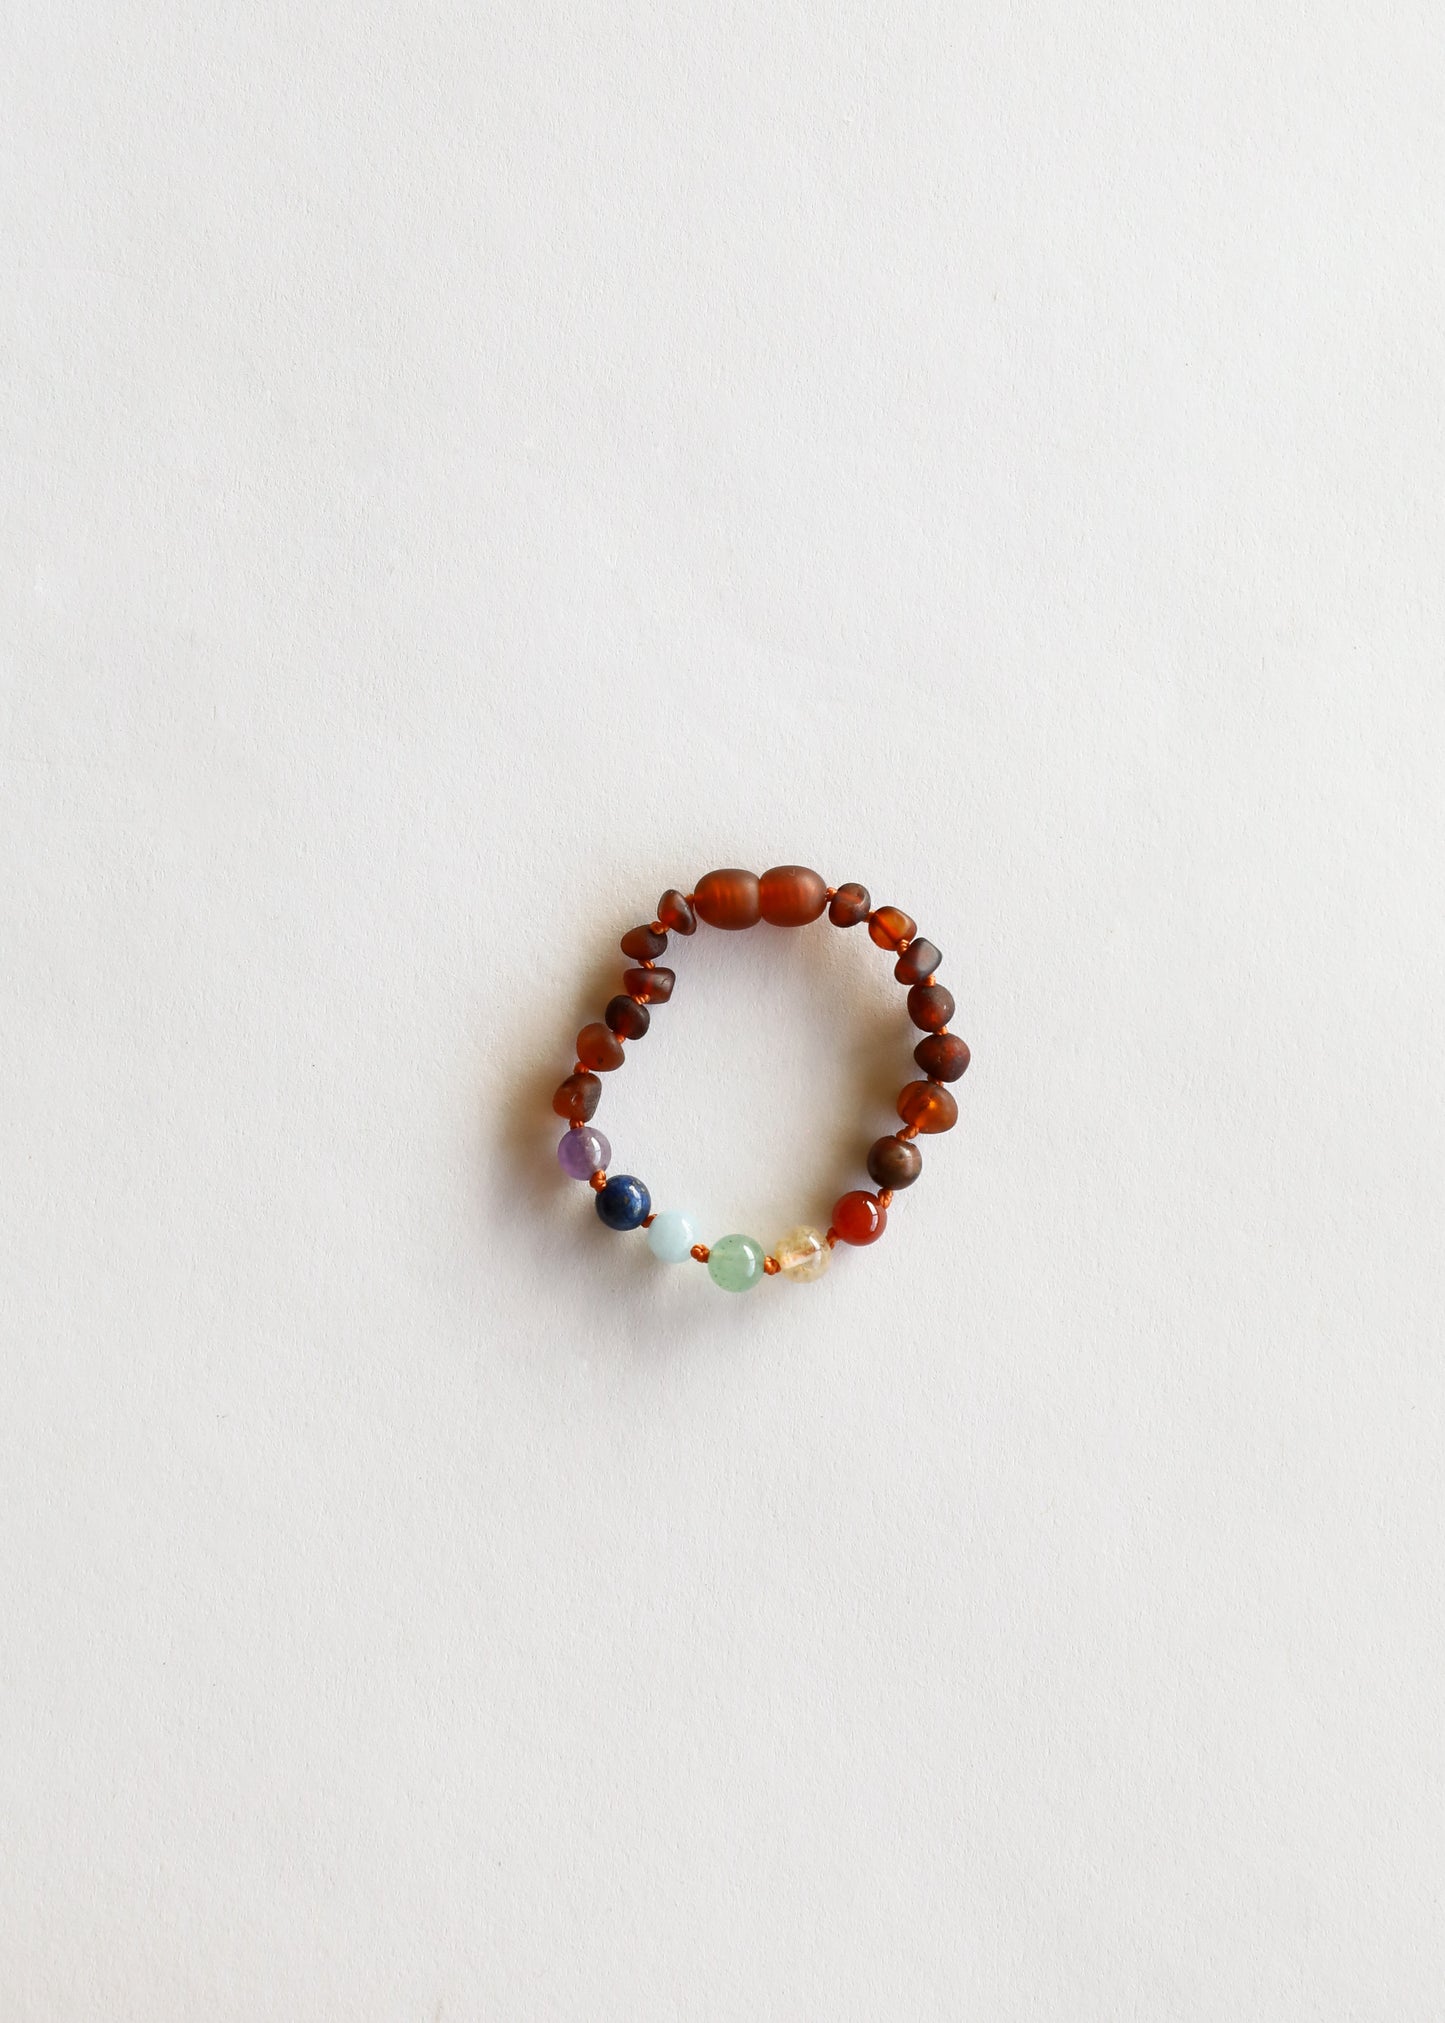 Raw Cognac Baltic Amber + CHAKRA Crystals || Anklet or Bracelet